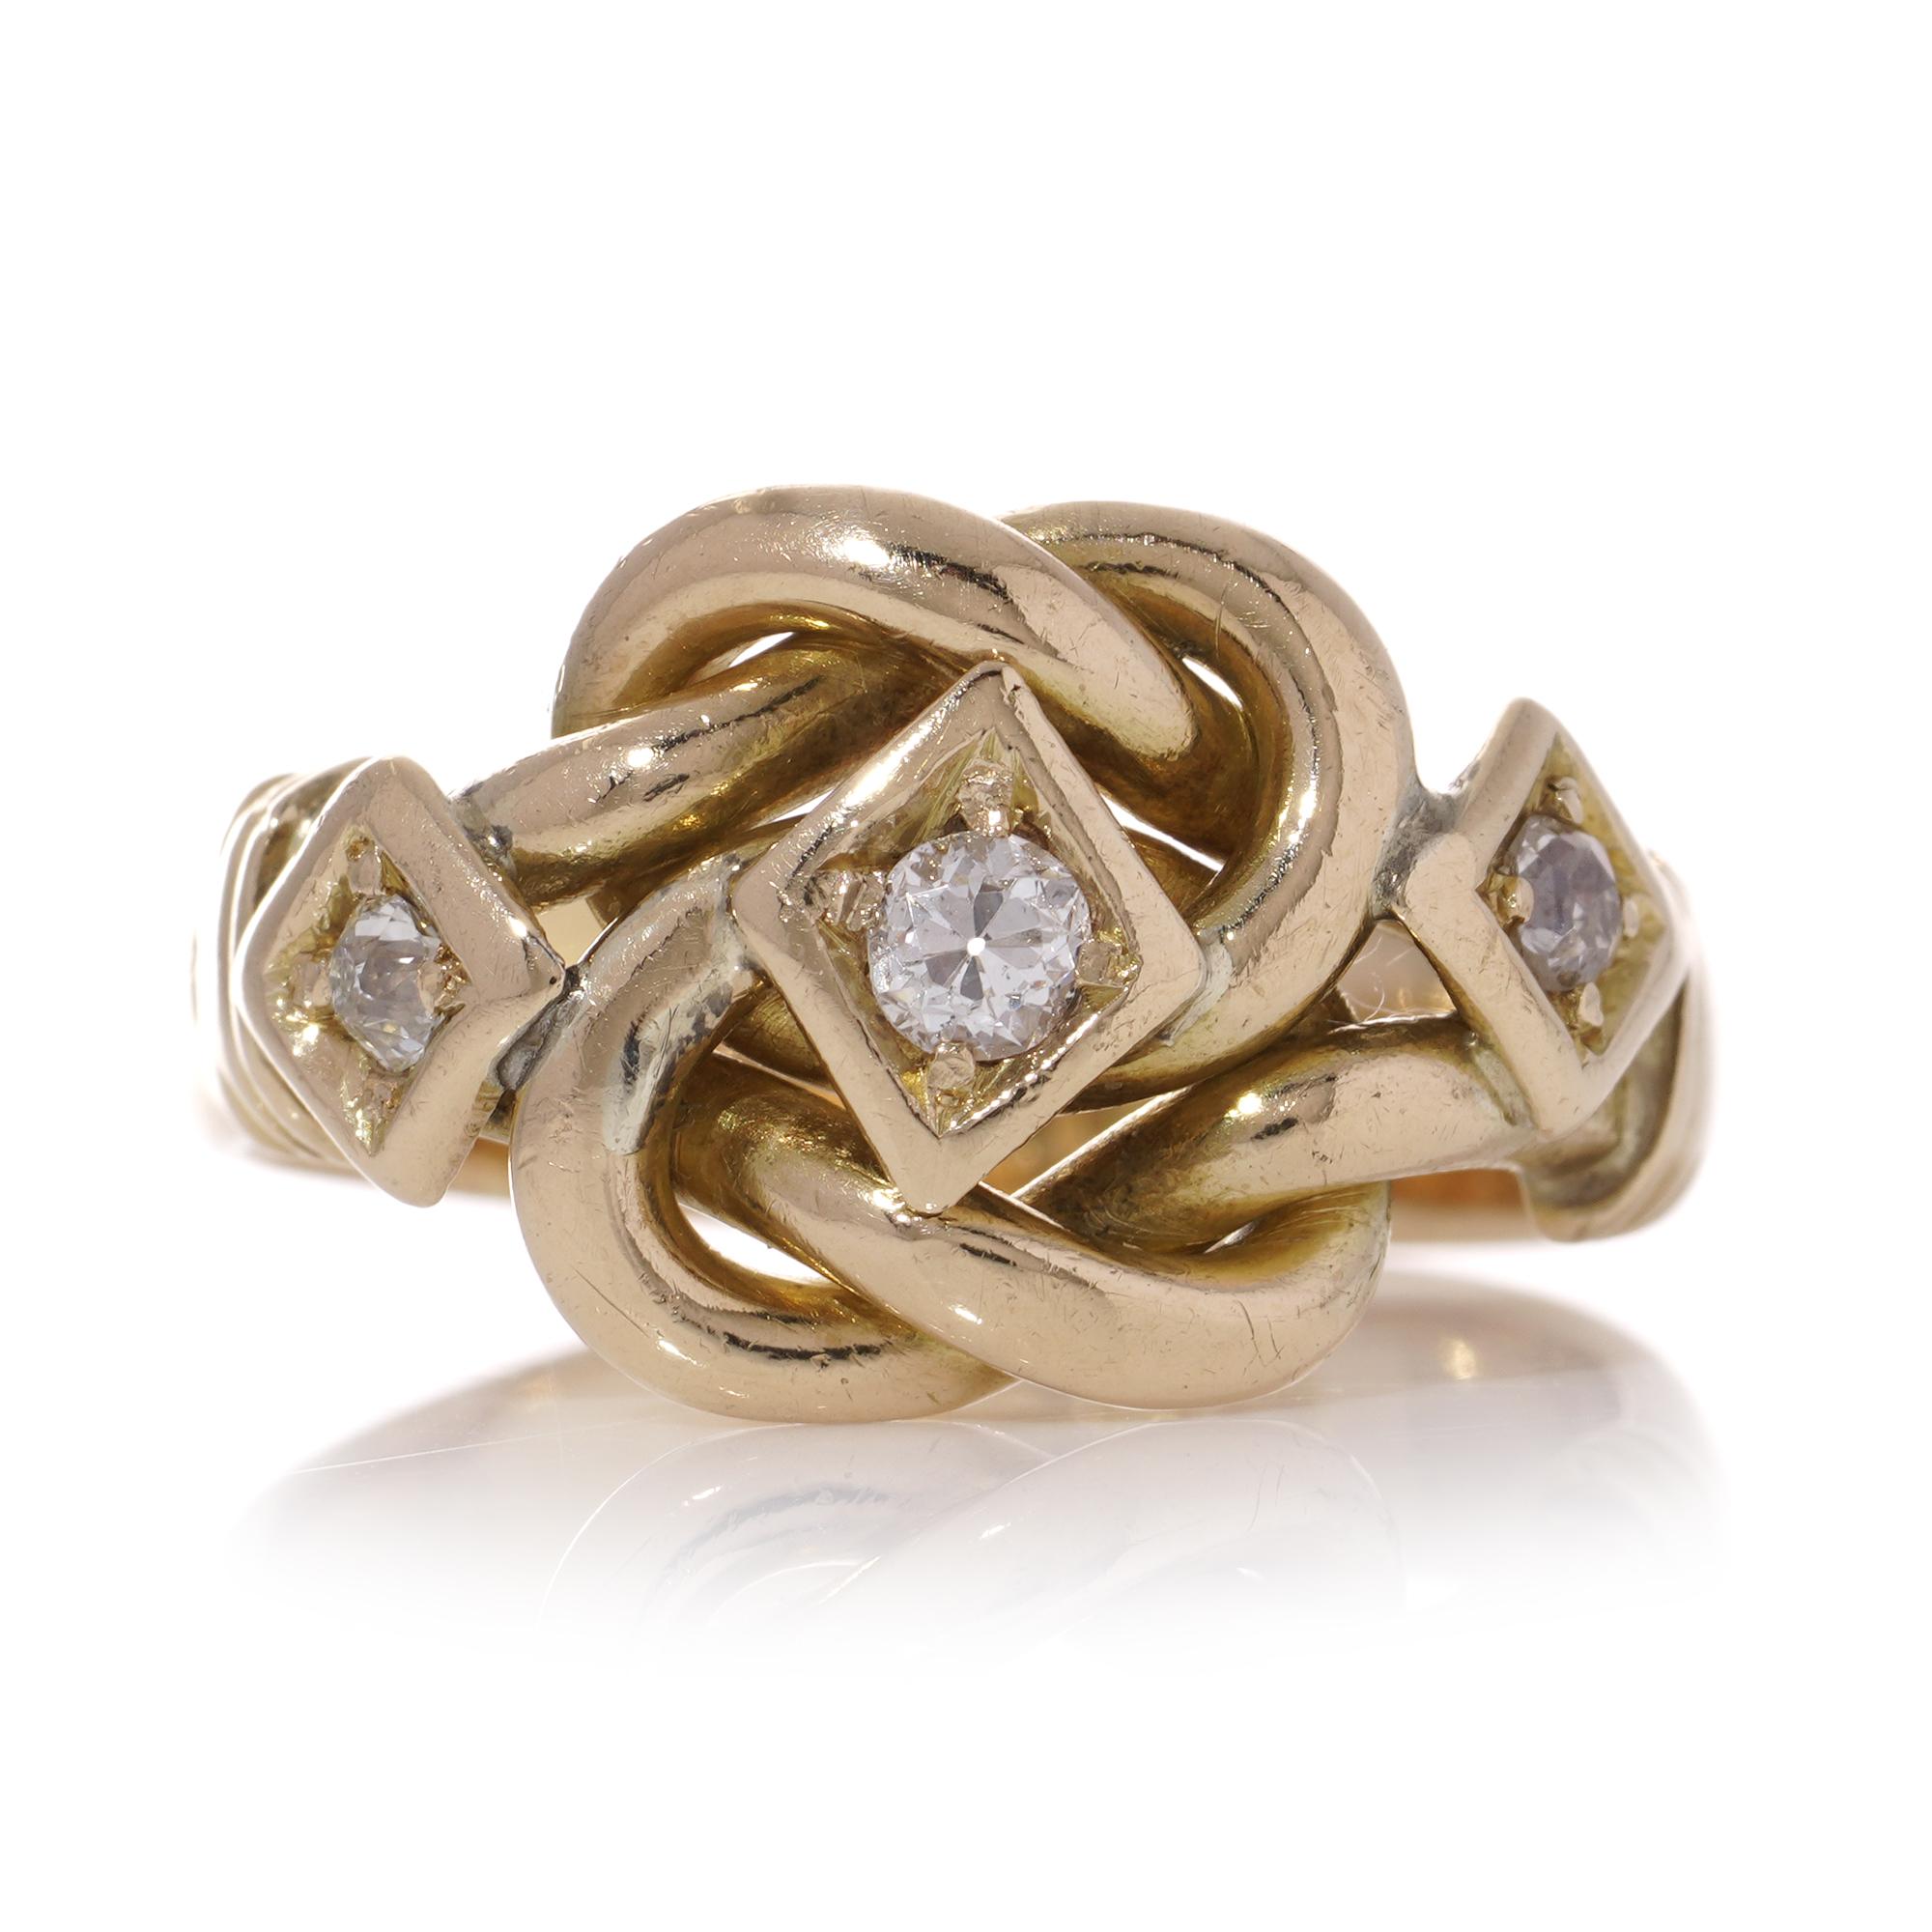 Vintage 18kt yellow gold knot design three-stone 0.20 carats of diamond ring. 
Made in England, London, 1974
Fully hallmarked. 

Dimensions - 
Finger Size (UK) = P 1/2 (EU) = 57.5  (US) = 8.5 
Weight: 9.2 grams
Ring size: 

Diamonds - 
Cut: Old -